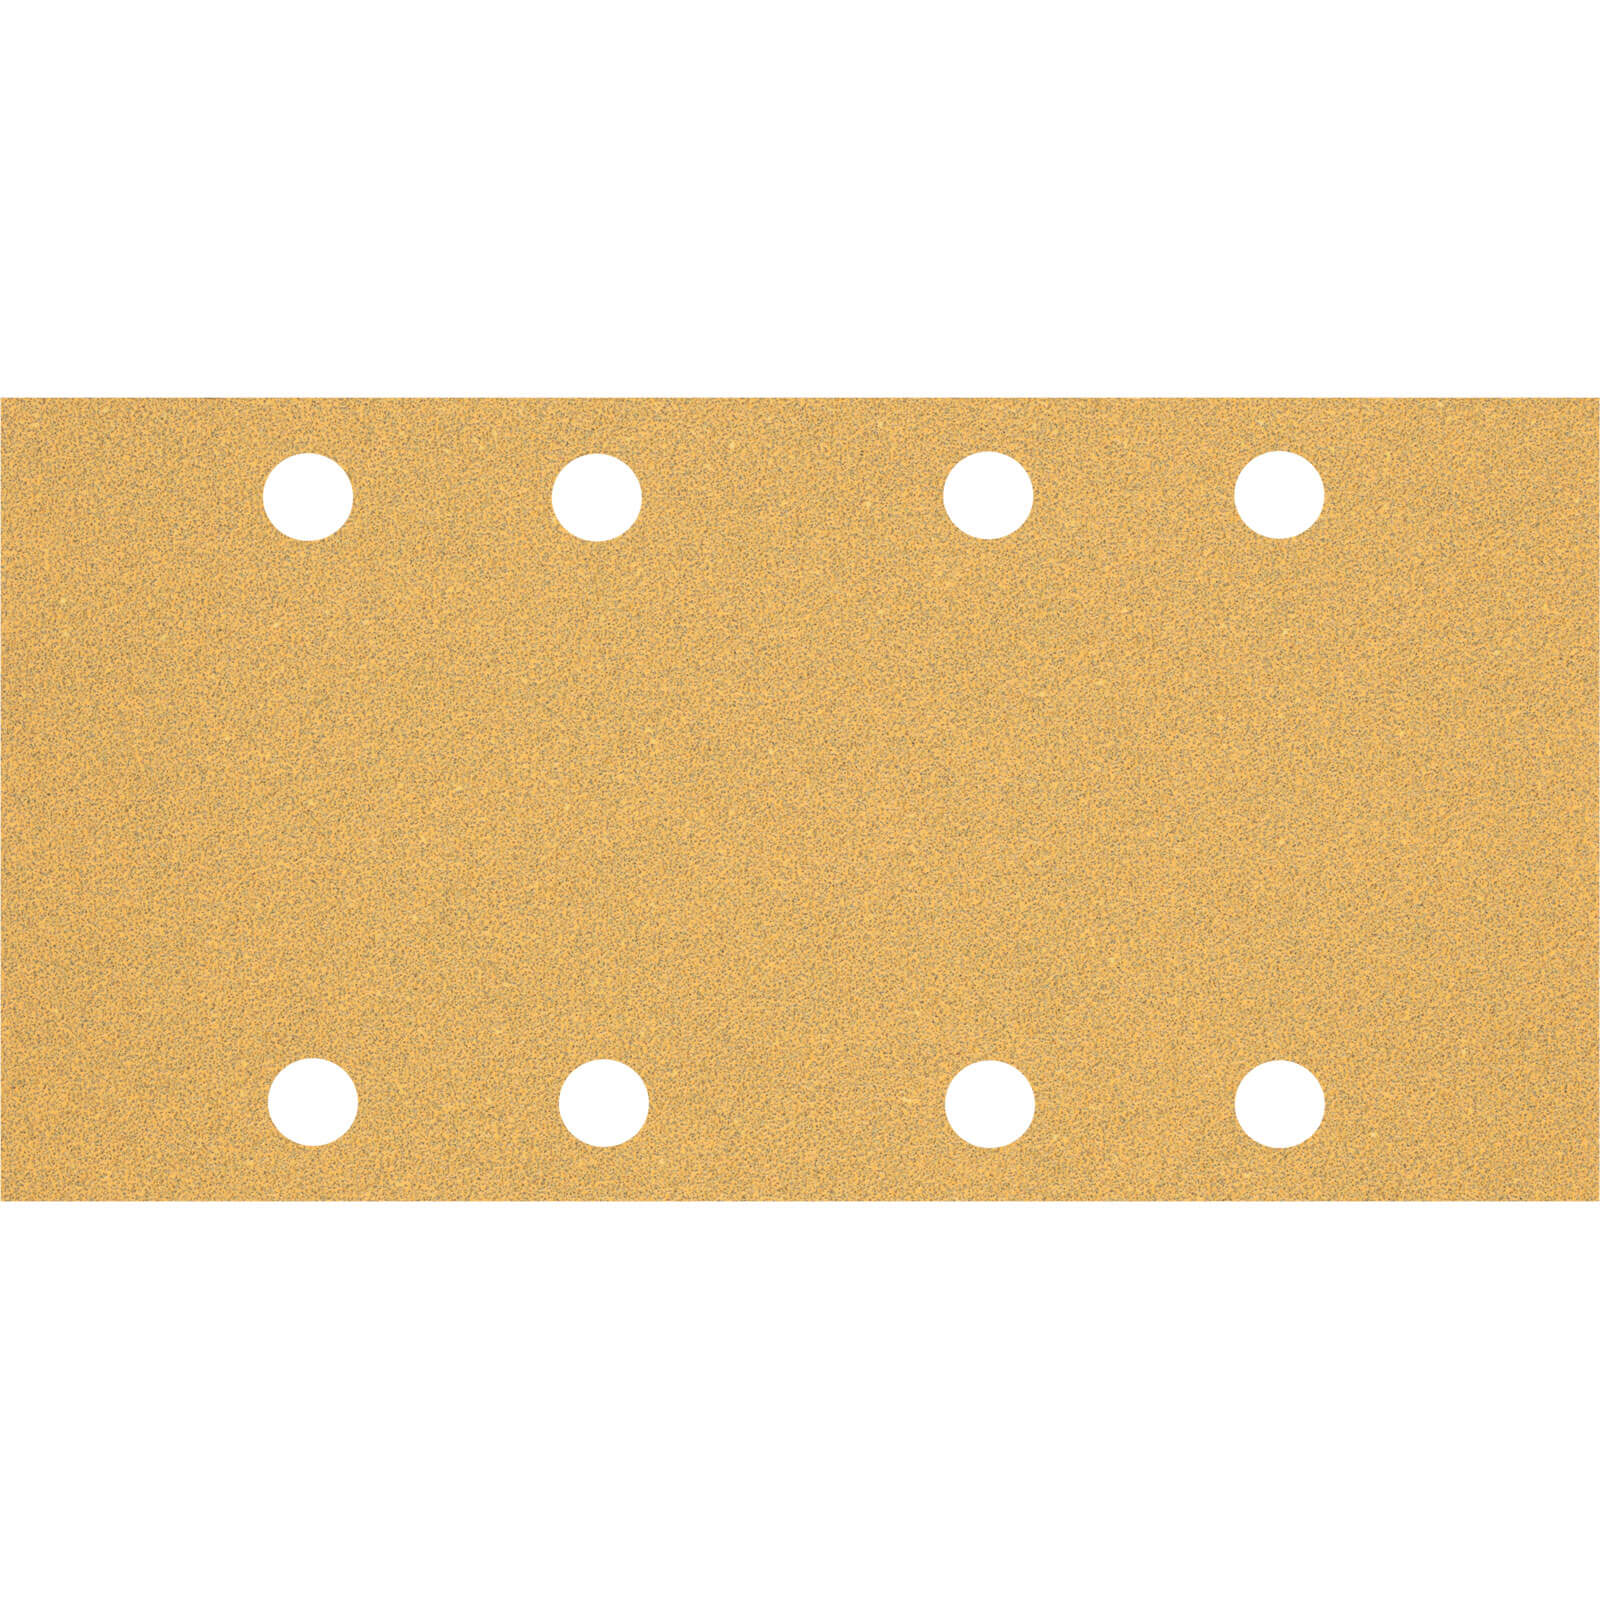 Image of Bosch Expert C470 Punched Hook and Loop Sanding Sheets 93mm x 186mm 60g Pack of 10